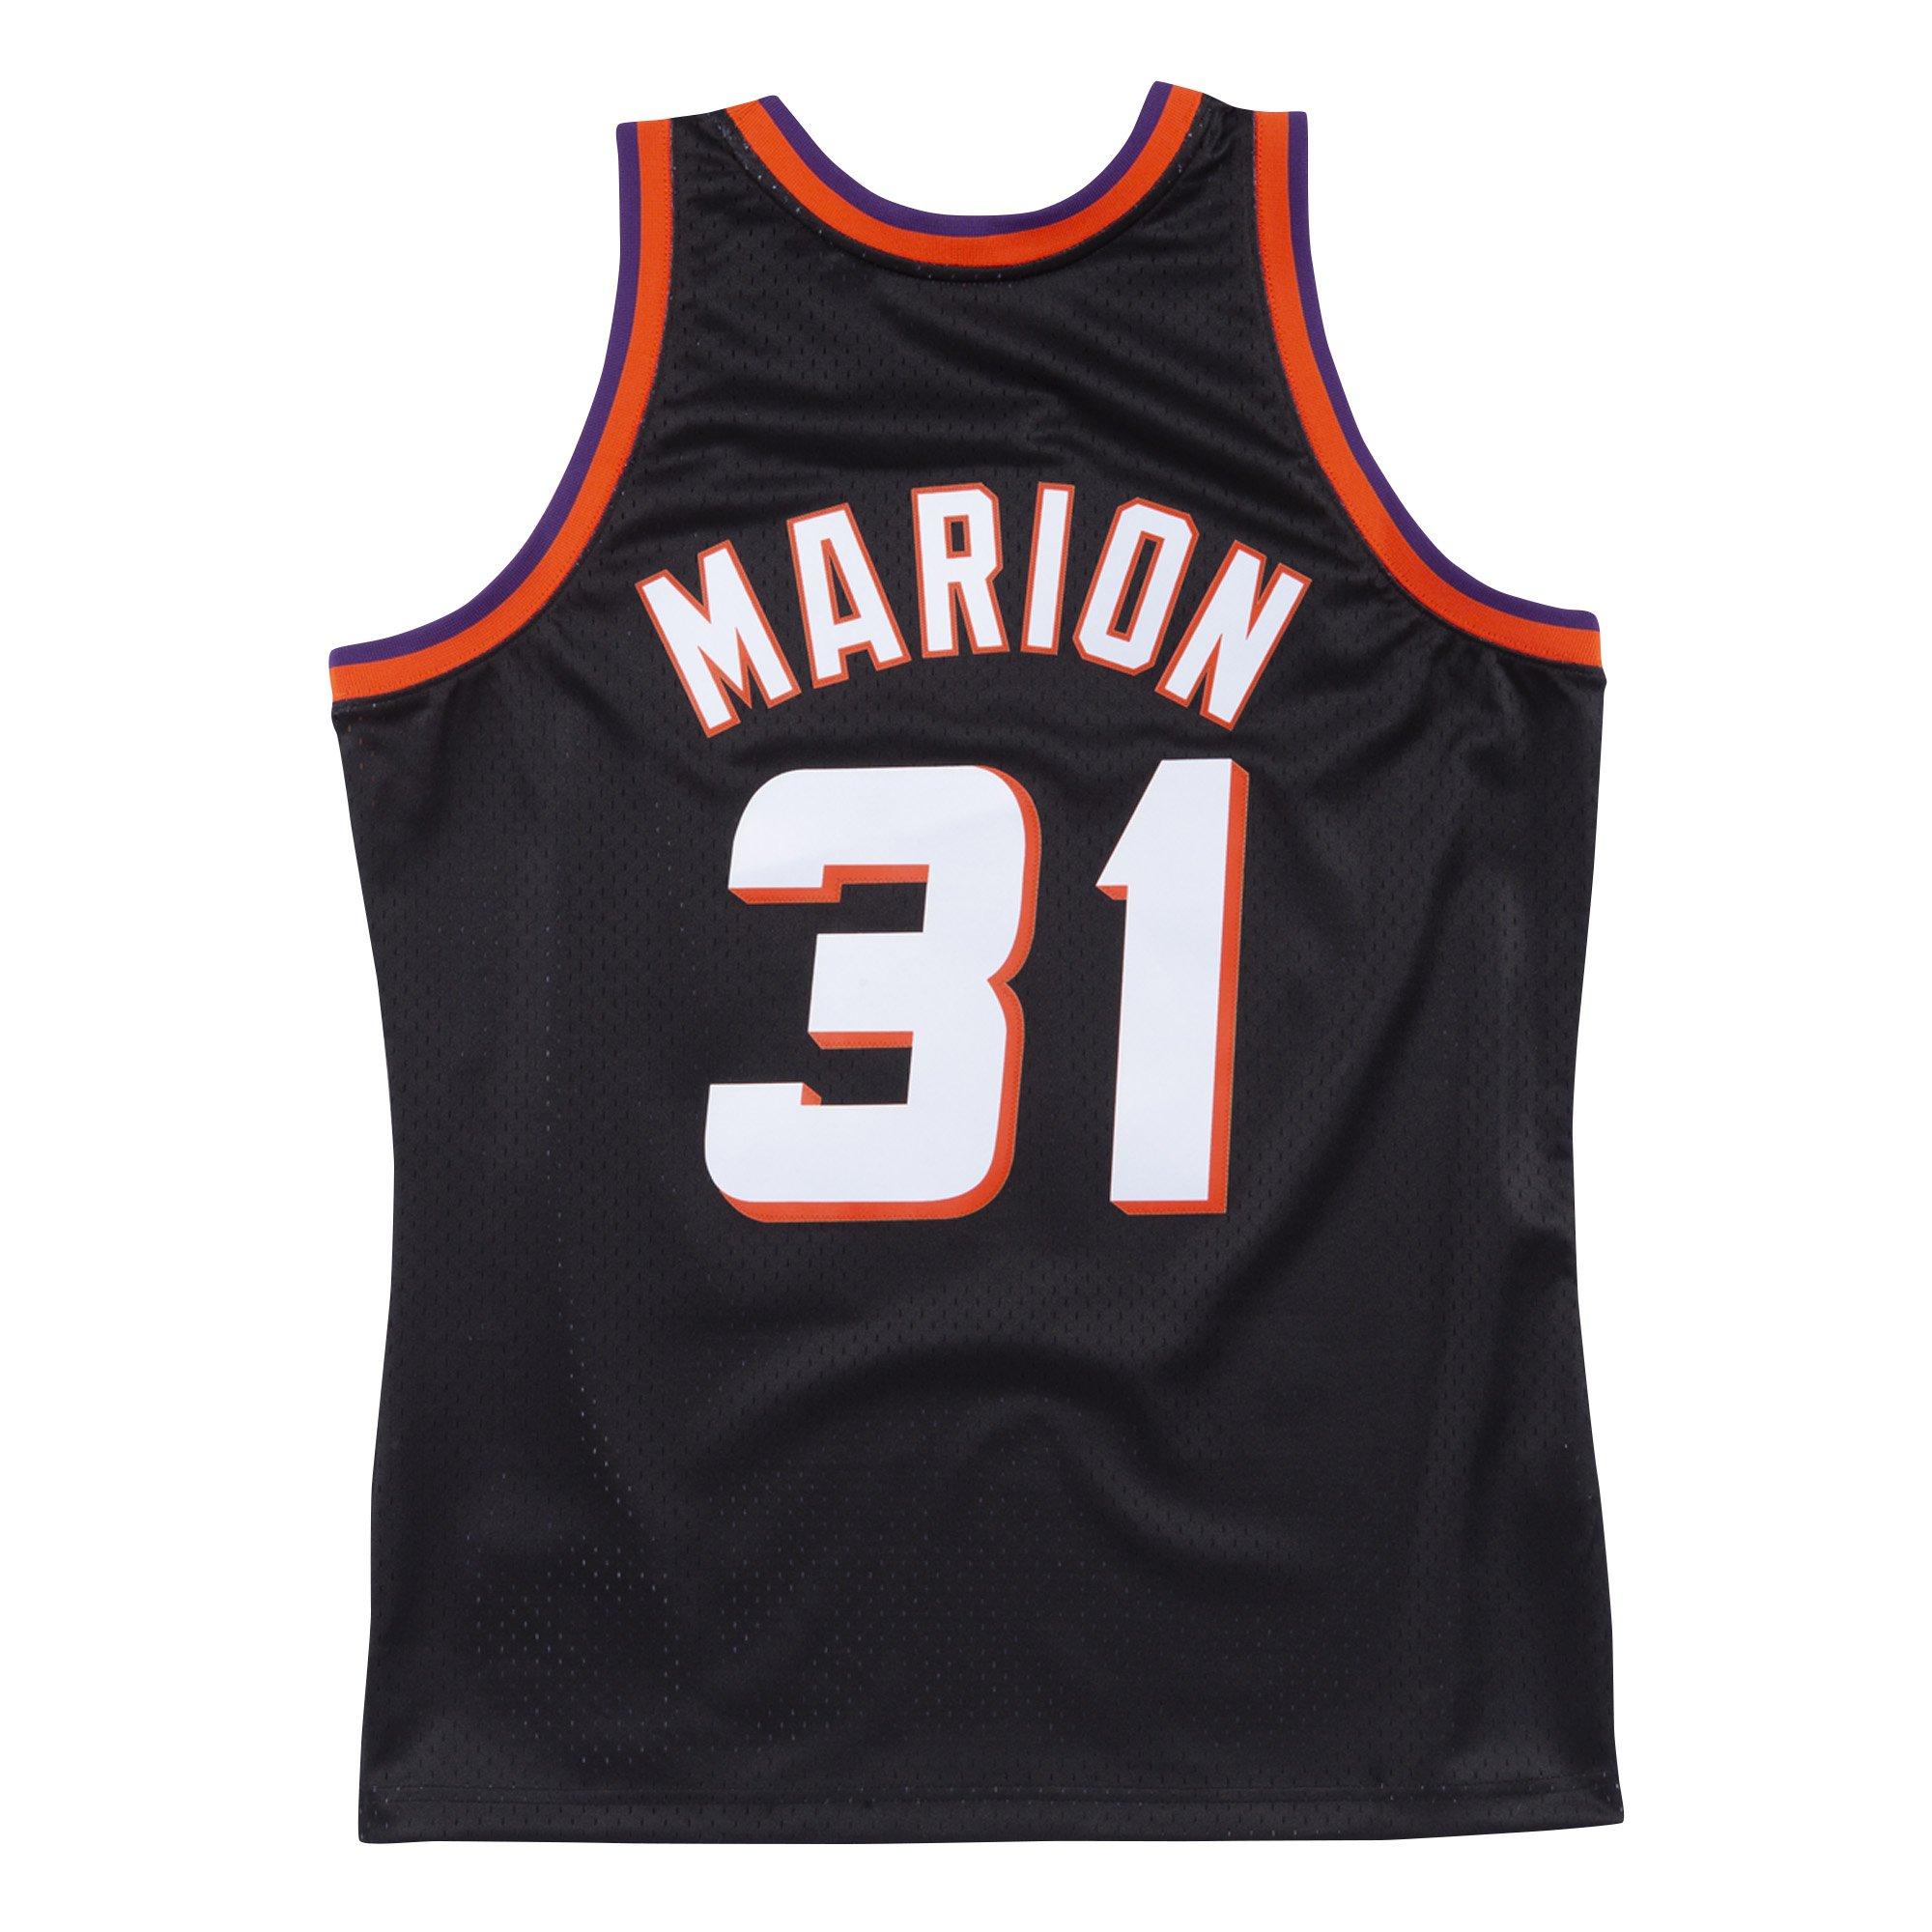 shawn marion suns jersey